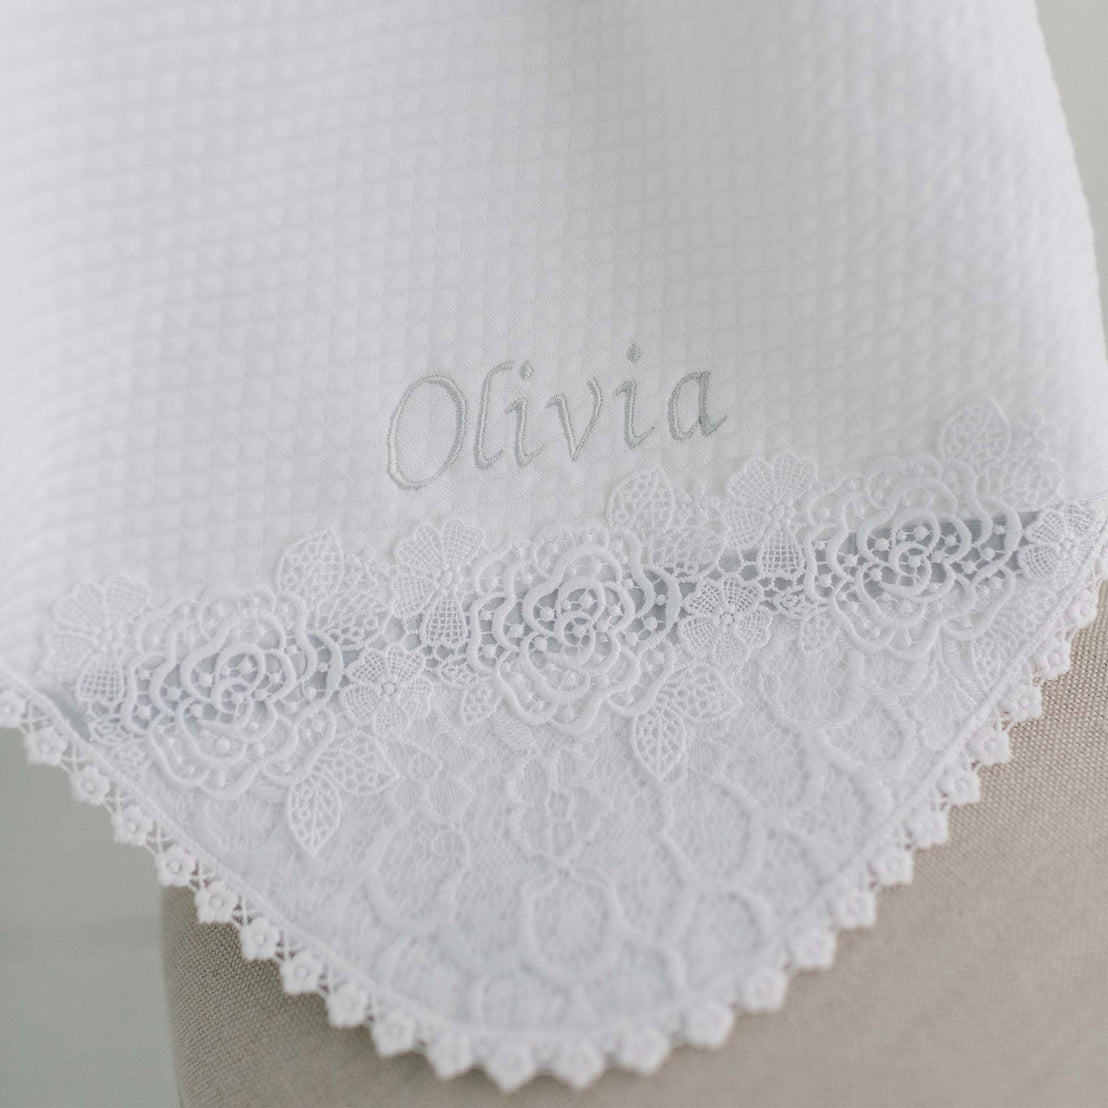 Close-up of a boutique white Olivia Blanket with delicate lace detailing along the edge and the name "Olivia" embroidered in a graceful, italic script.